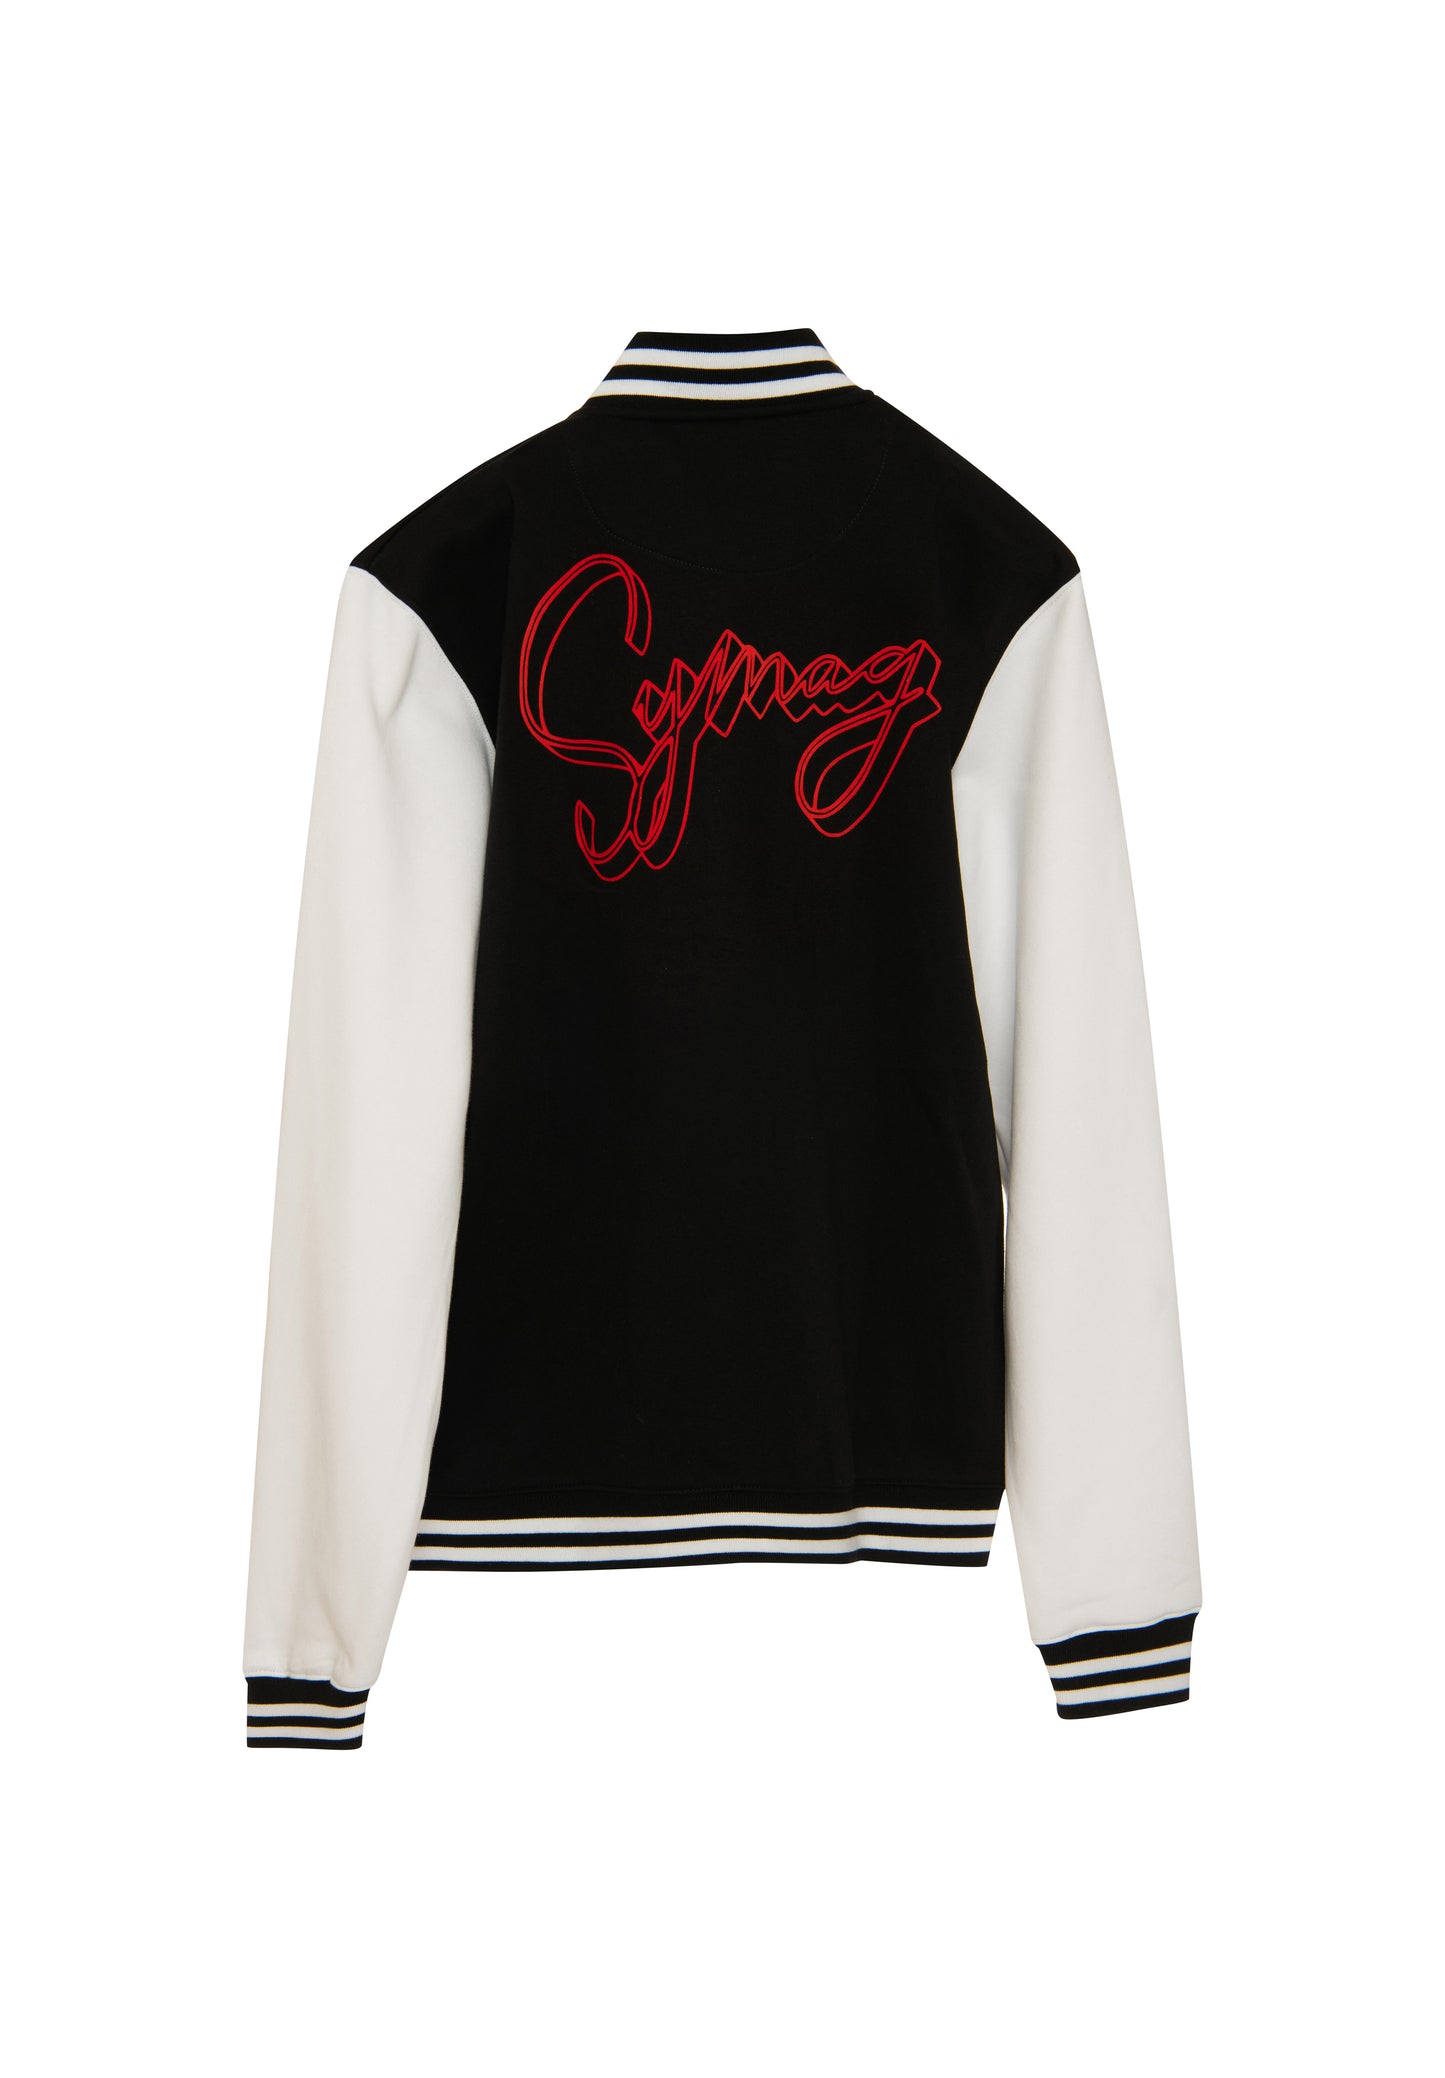 College Jacket - Symag on the back